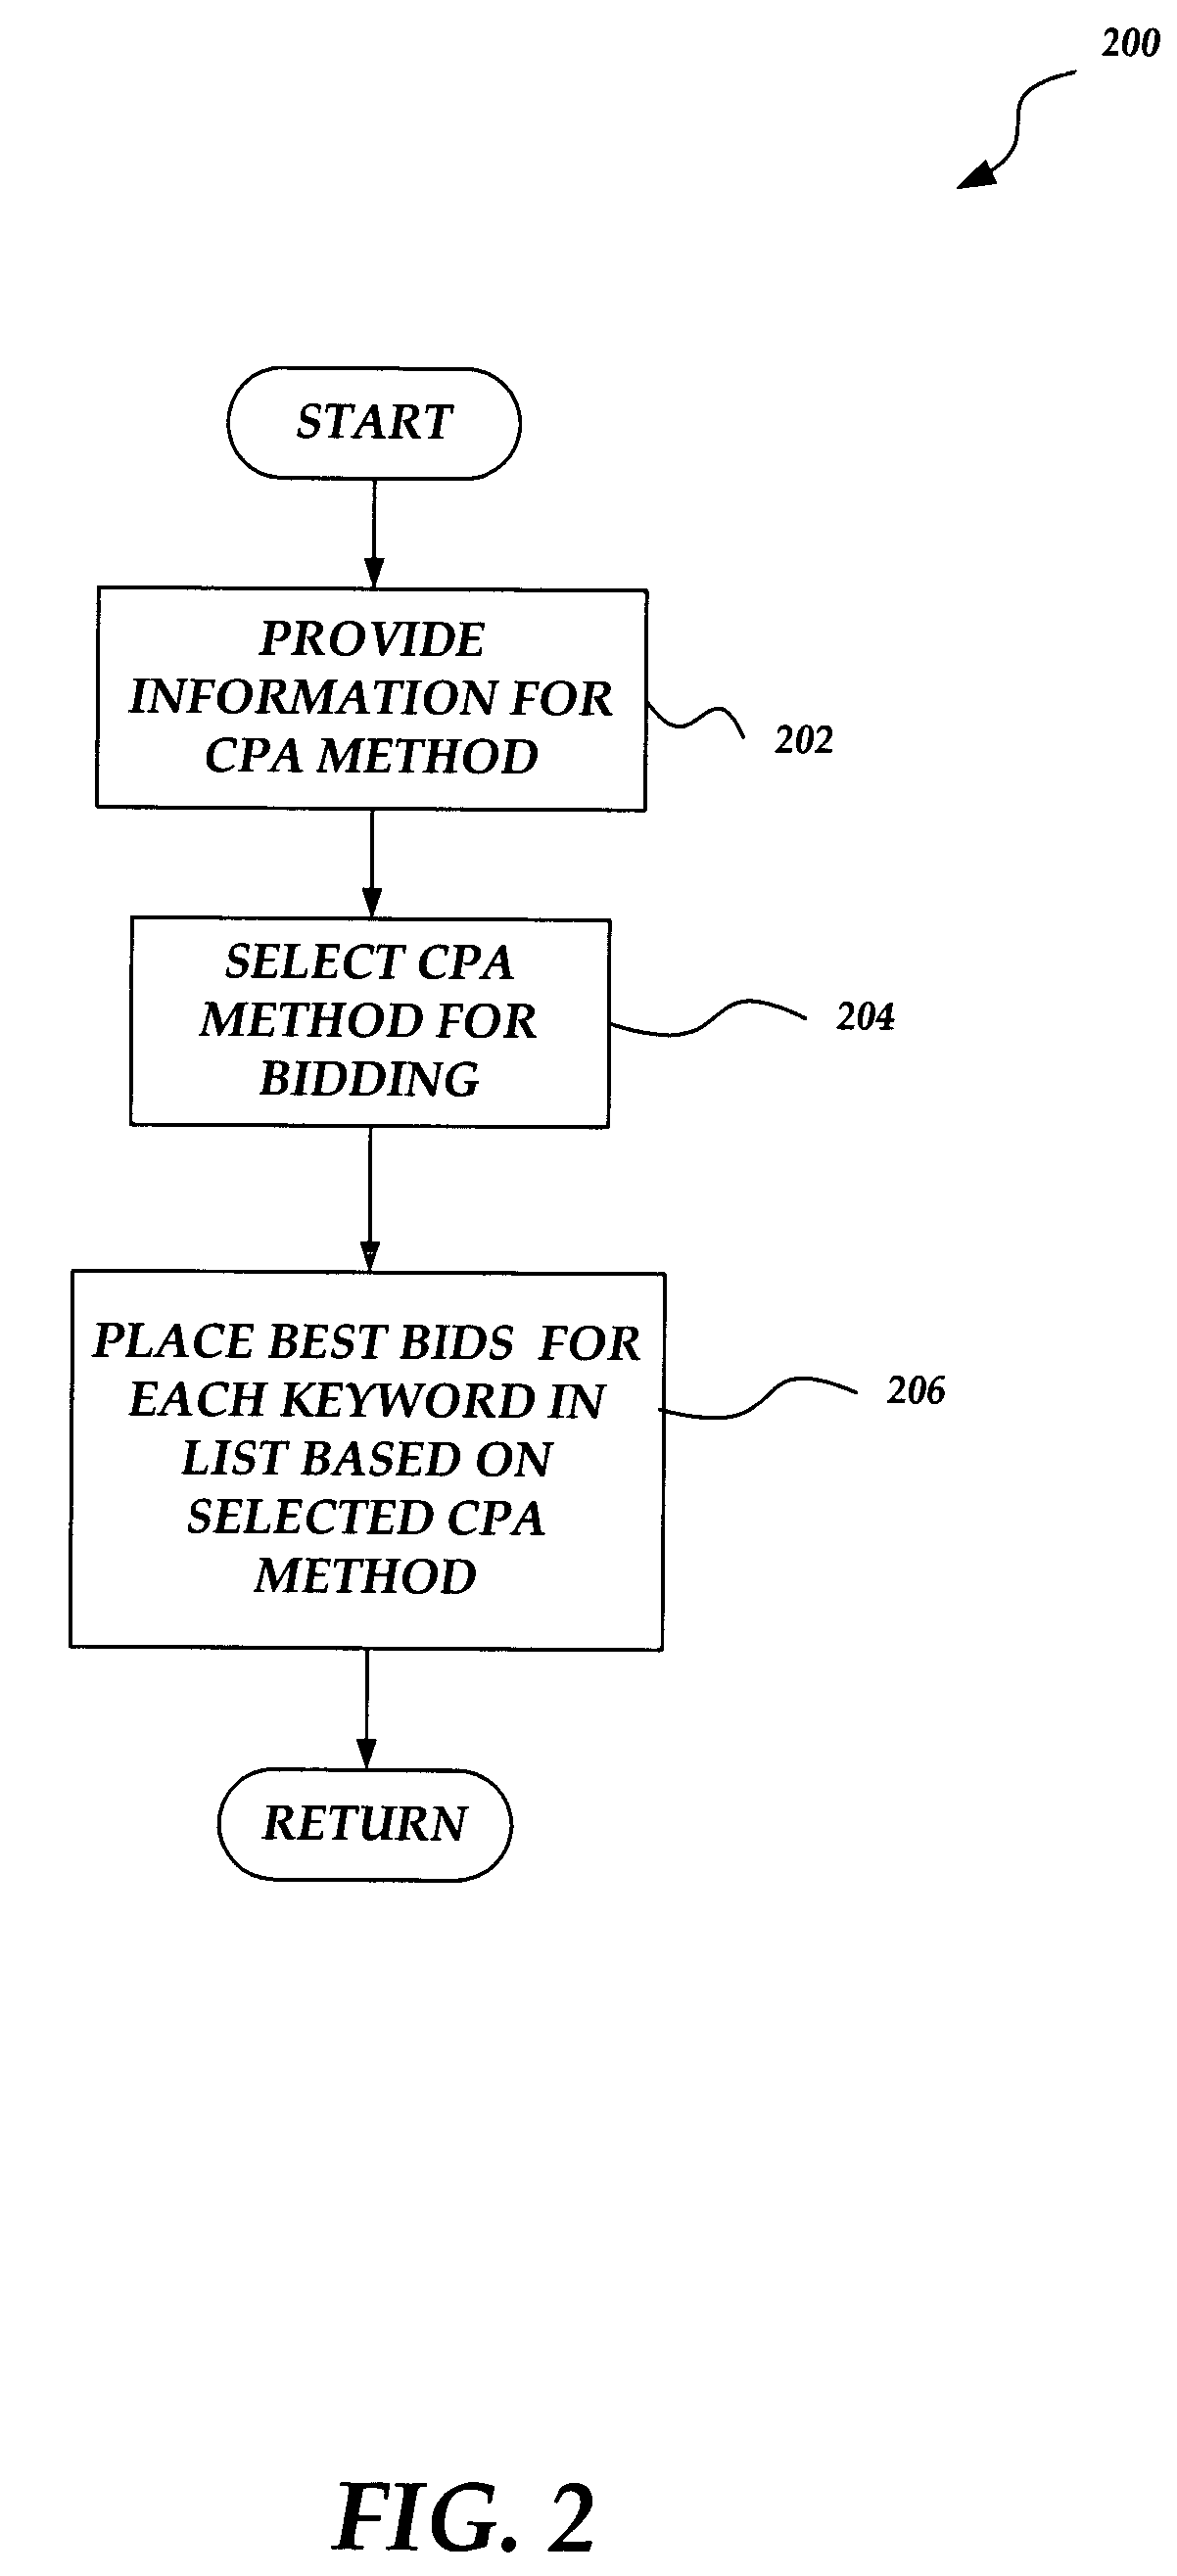 System and method for managing an advertising campaign on a network